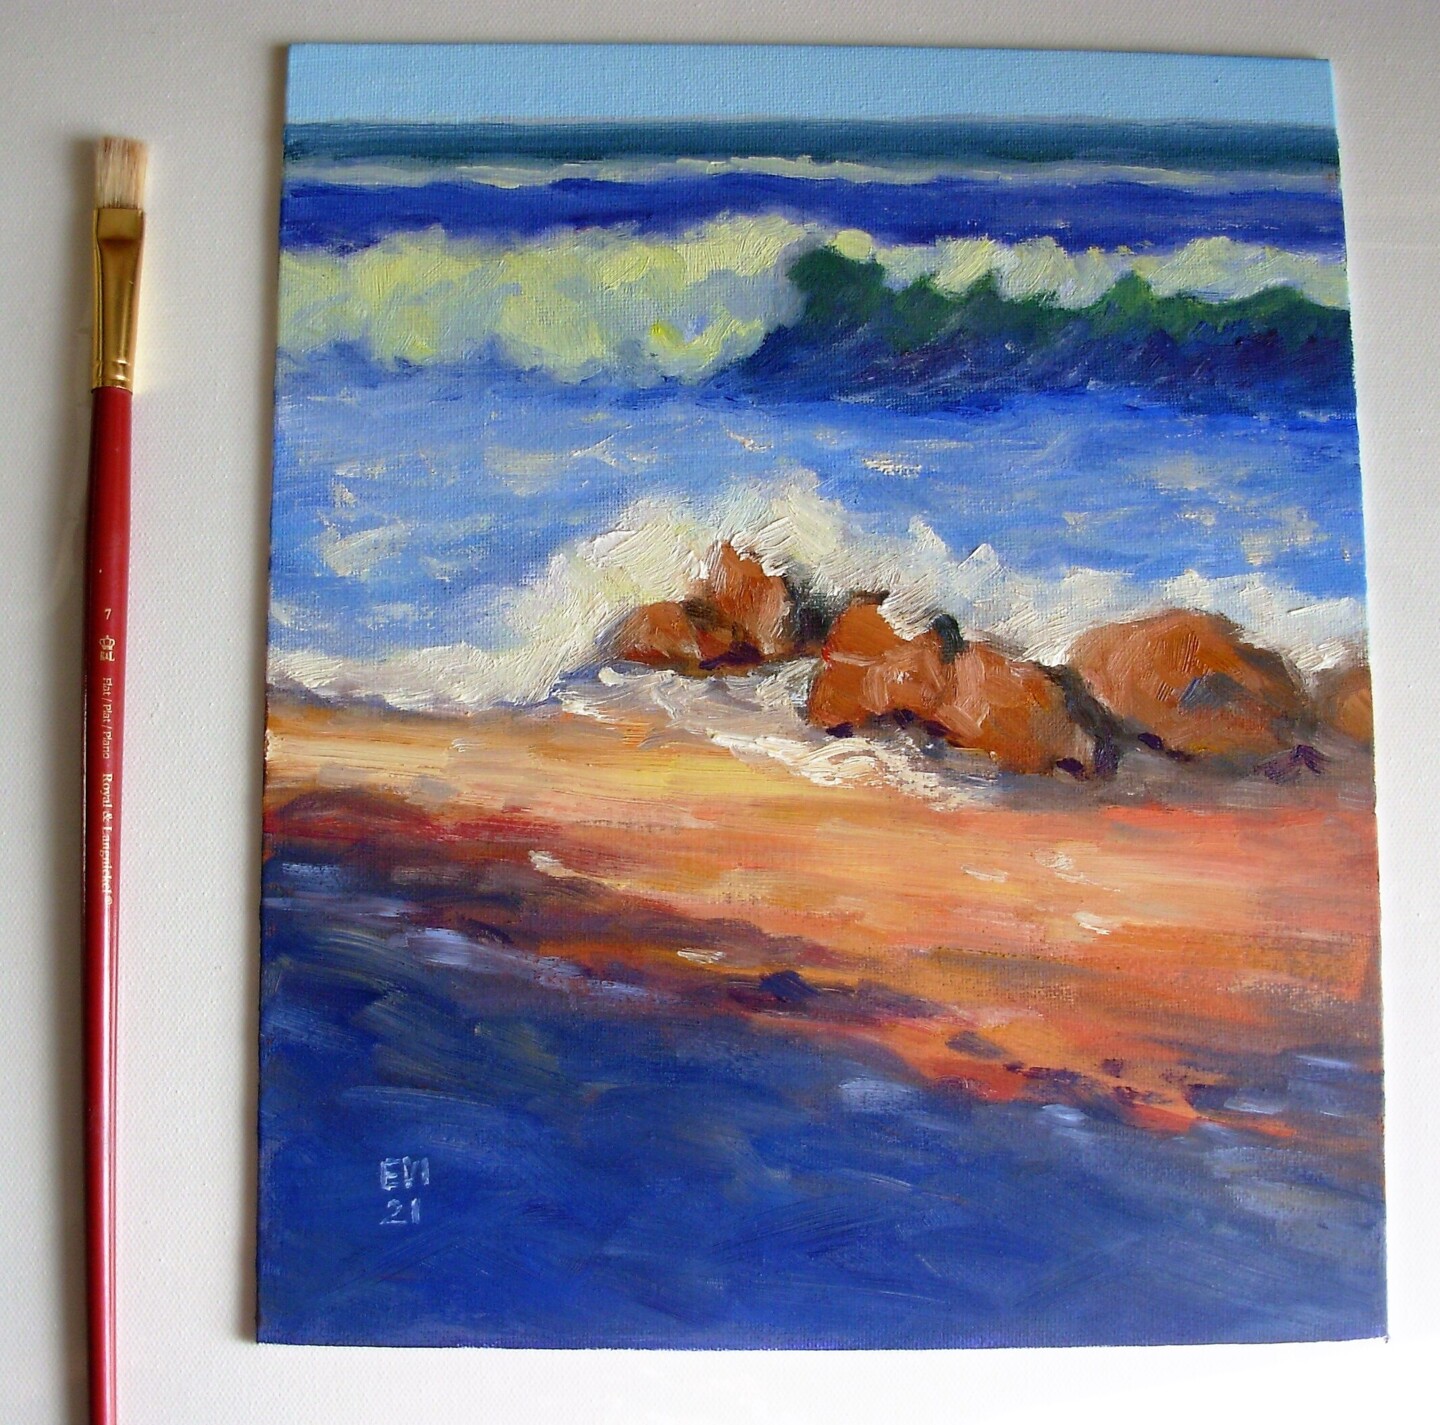 Seascape Original oil painting on canvas board 8x10 inches Painting by  Elena Ivanova